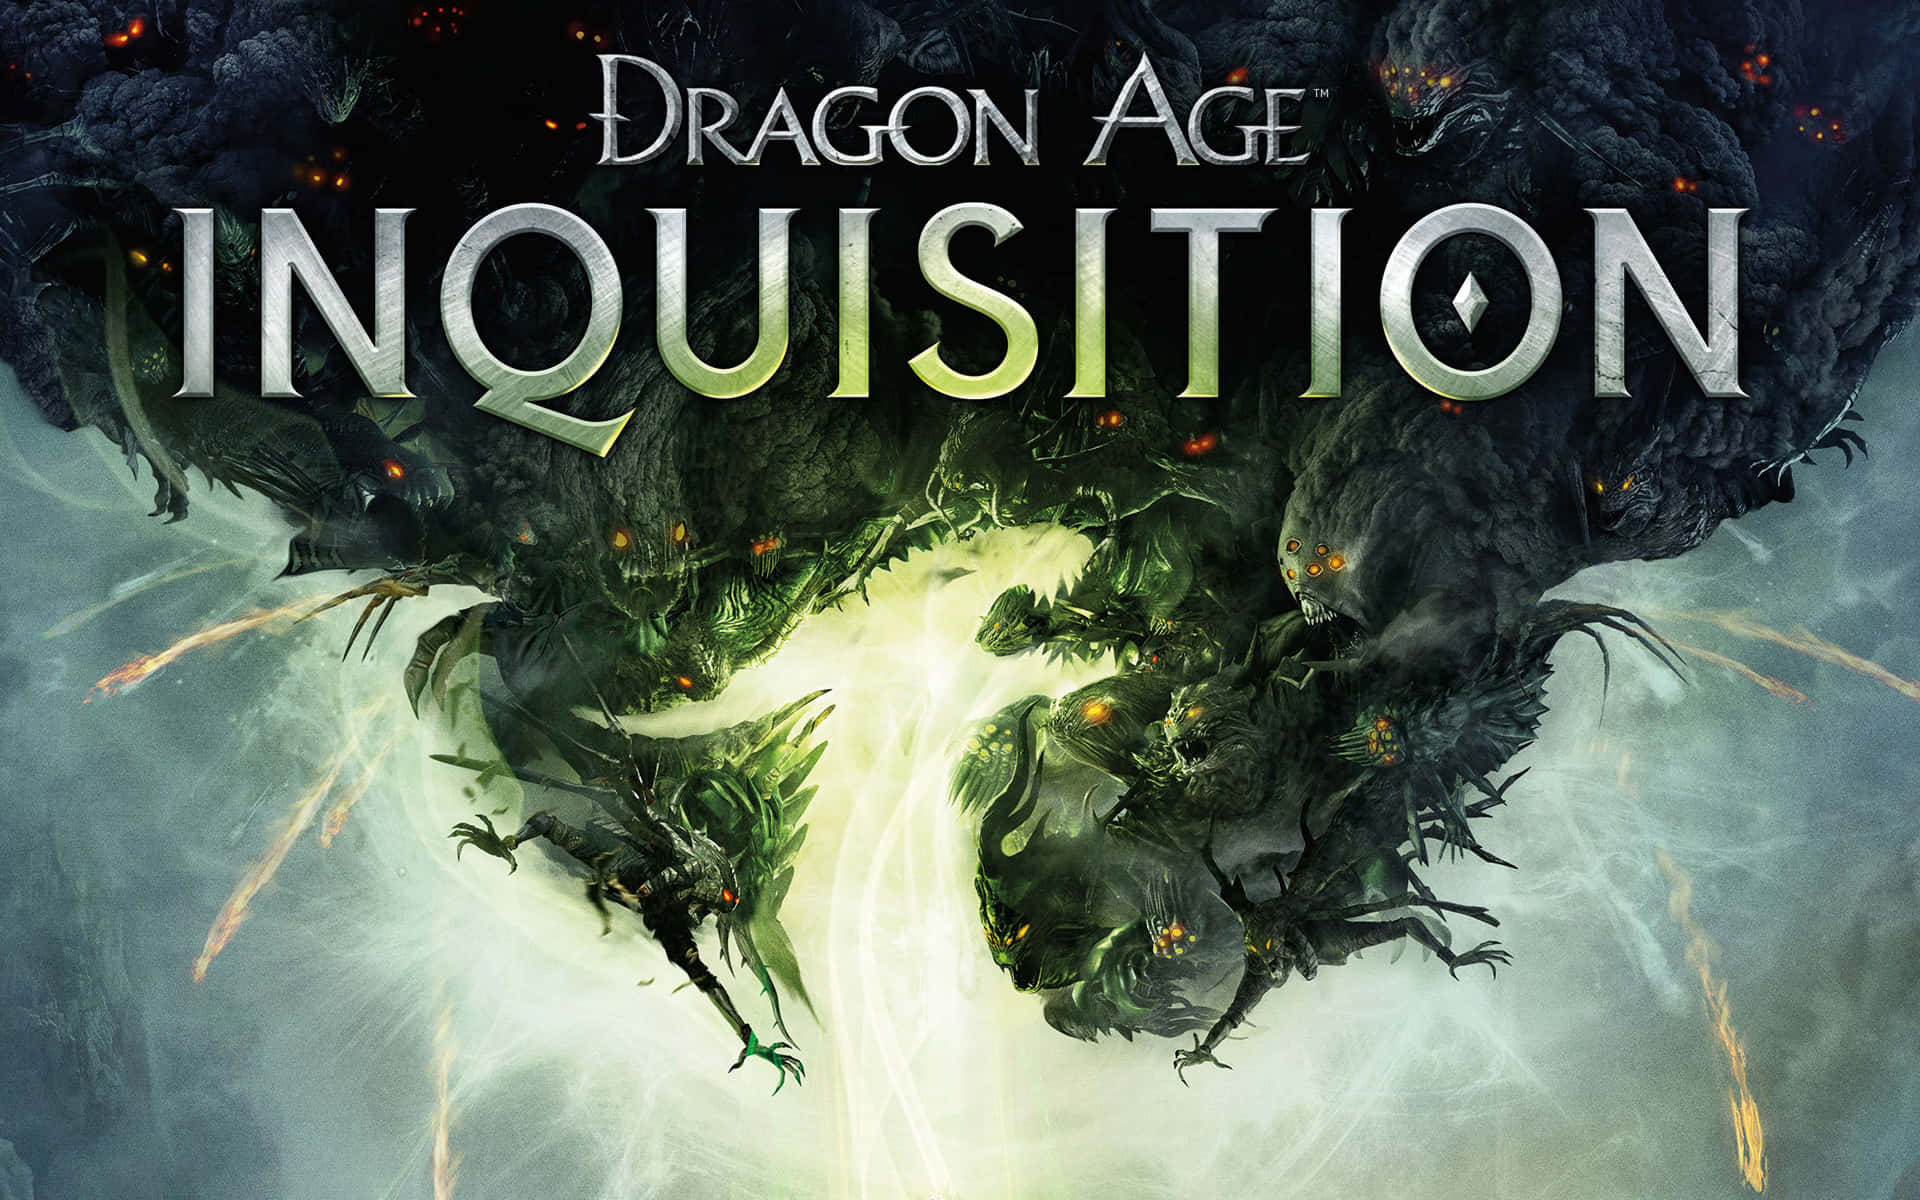 Experience Epic Fantasy Adventures in Dragon Age Inquisition